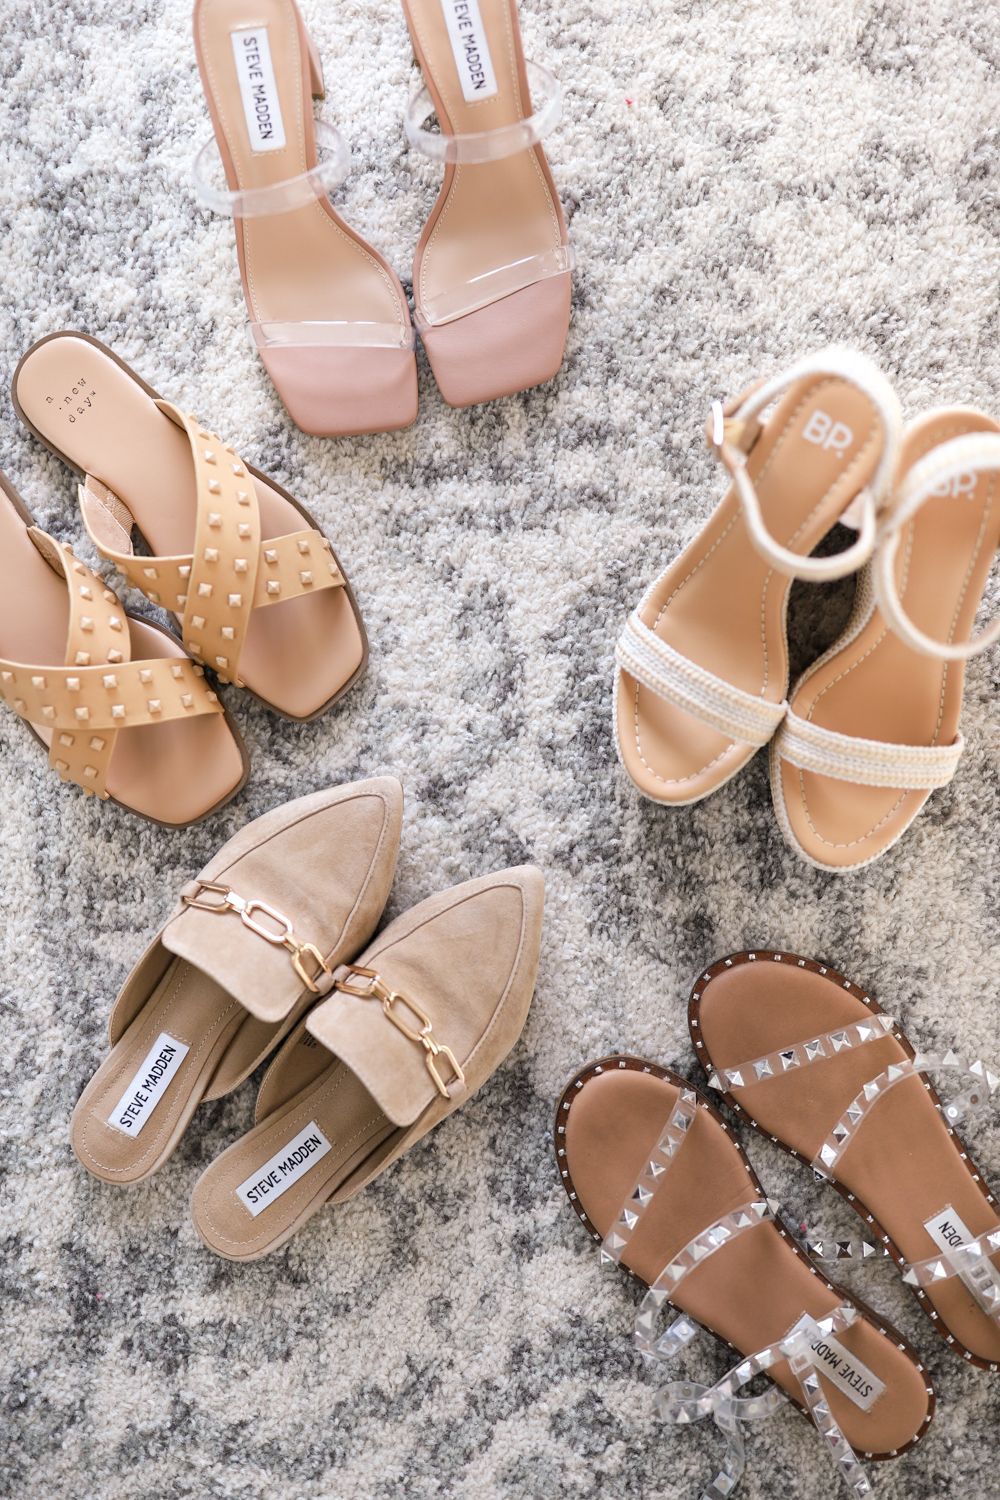 Step It Up! How to Level Up Your Petite Shoe Game